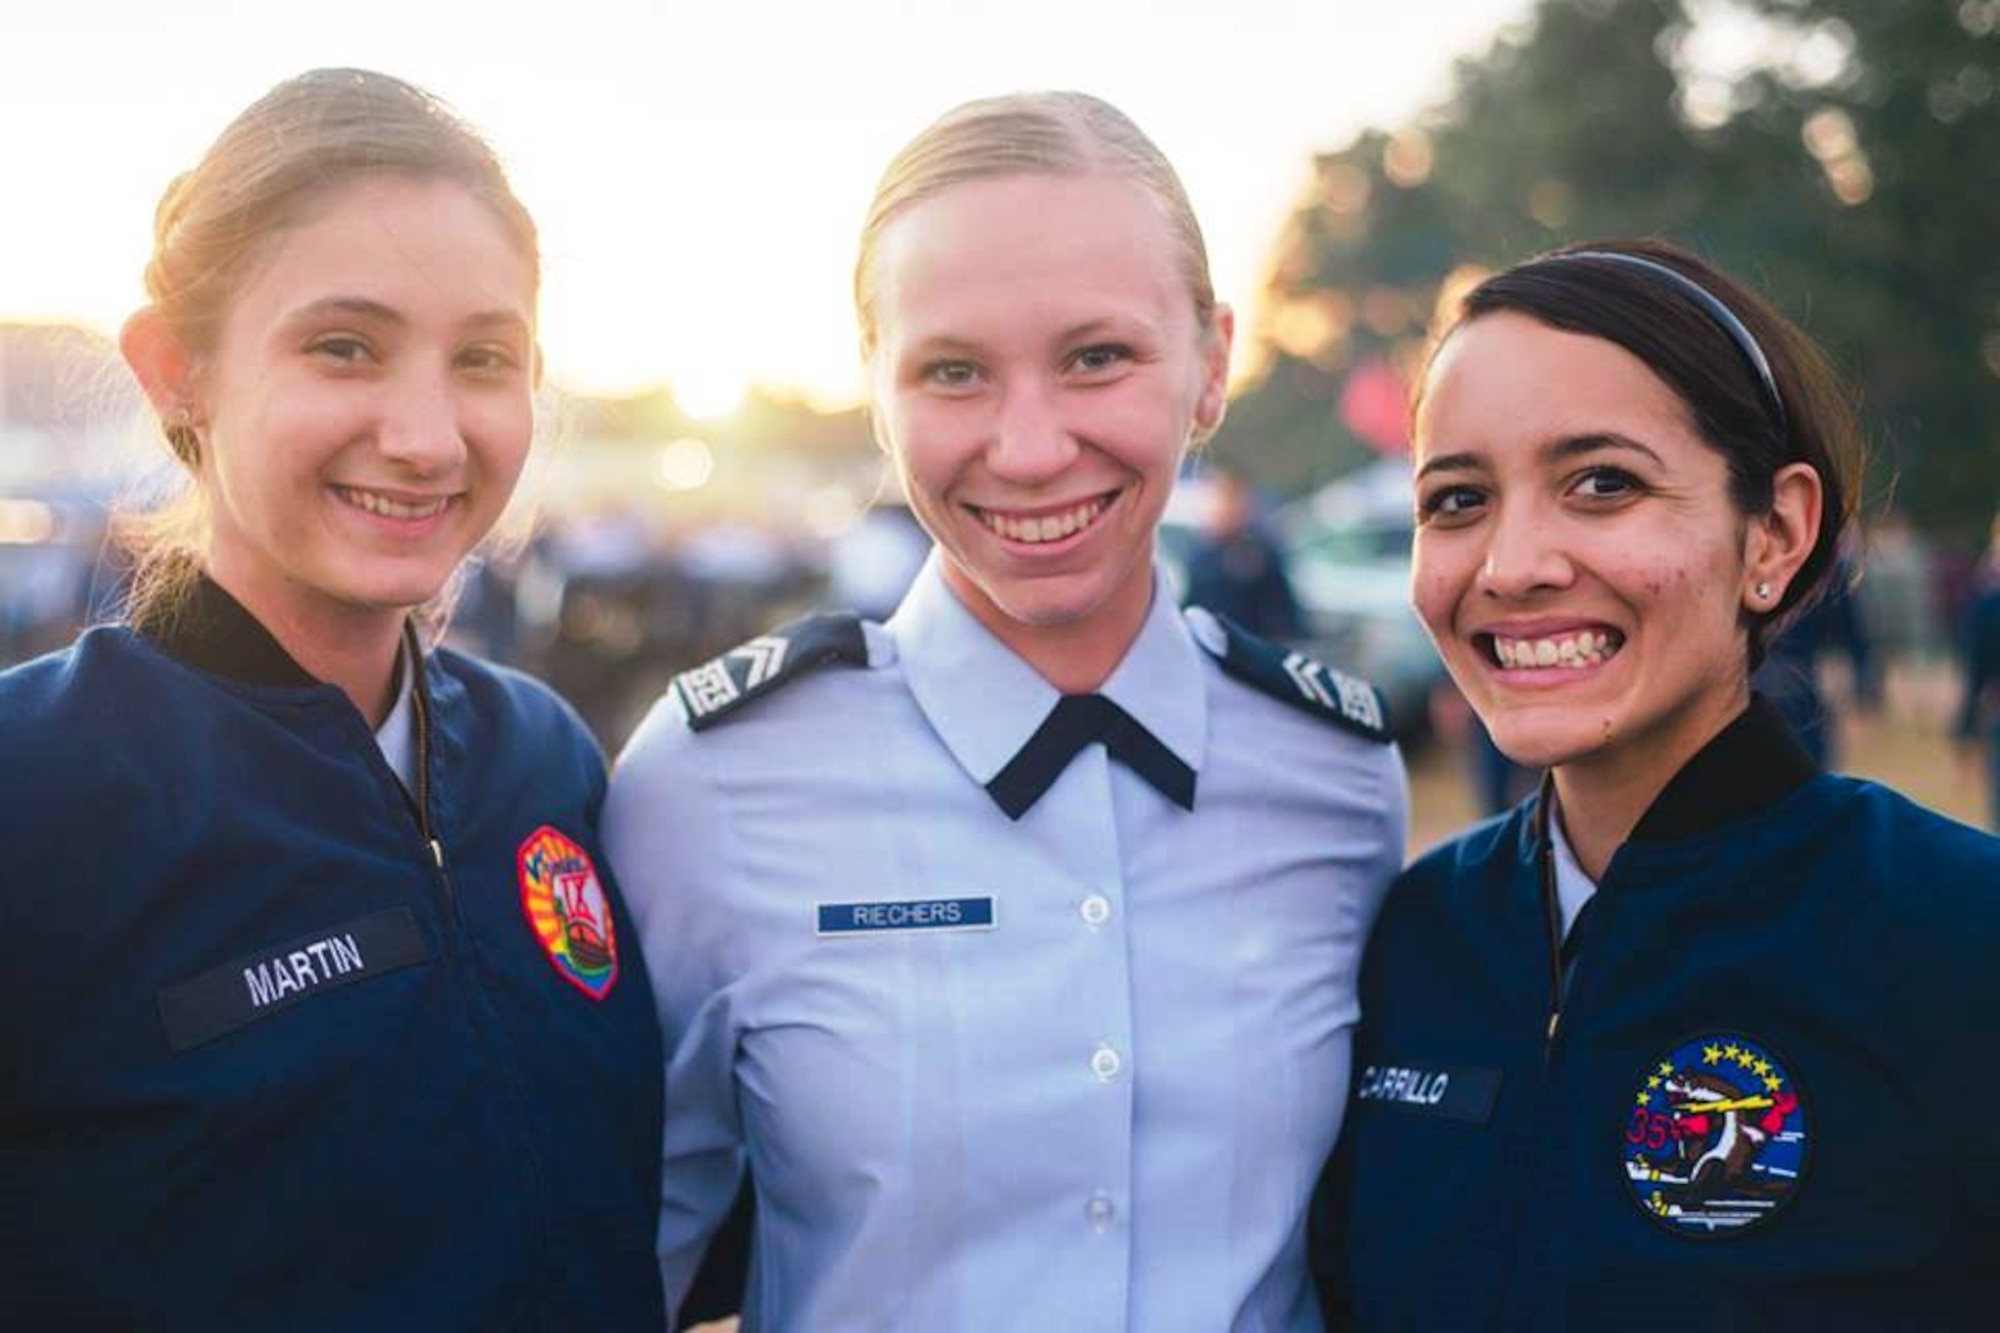 Cadet 2nd Class Emily Martin (left), poses for a photo with two of her best friends at the Air Force Academy, Cadets 2nd Class Katelyn Riechers and Catherine Carrillo, in 2016. Martin, 21, is from Gilbert, Arizona and pursuing a bachelors in political science at the Academy. She's assigned to Cadet Squadron 09. (Courtesy photo)